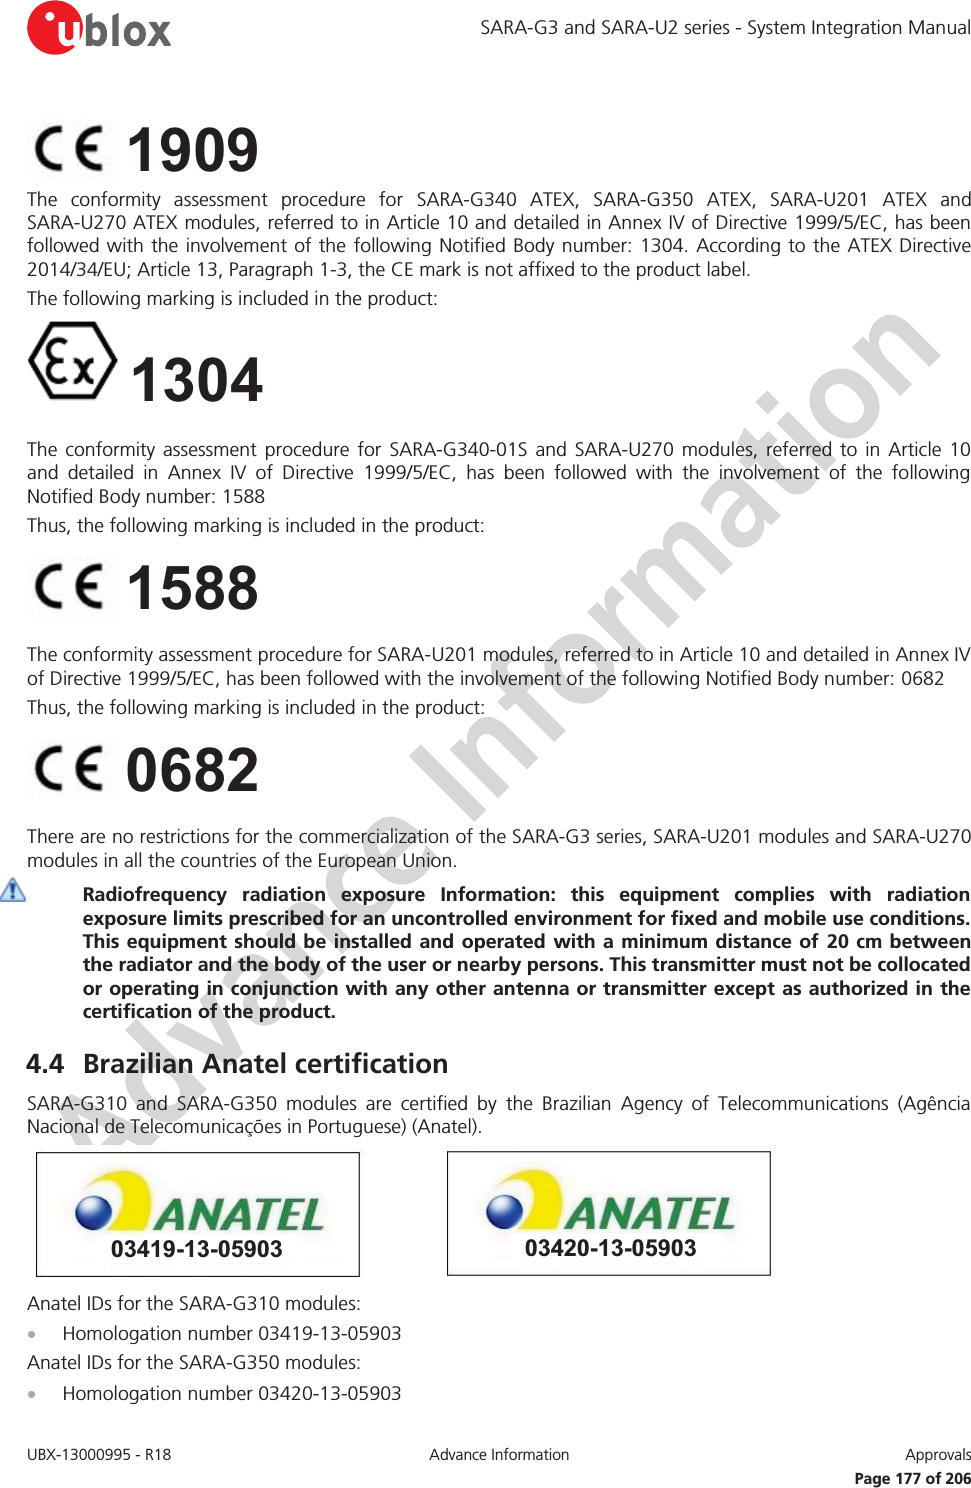 SARA-G3 and SARA-U2 series - System Integration Manual UBX-13000995 - R18  Advance Information  Approvals   Page 177 of 206  The conformity assessment procedure for SARA-G340 ATEX, SARA-G350 ATEX, SARA-U201 ATEX and SARA-U270 ATEX modules, referred to in Article 10 and detailed in Annex IV of Directive 1999/5/EC, has been followed with the involvement of the following Notified Body number: 1304. According to the ATEX Directive 2014/34/EU; Article 13, Paragraph 1-3, the CE mark is not affixed to the product label.  The following marking is included in the product:   1304  The conformity assessment procedure for SARA-G340-01S and SARA-U270 modules, referred to in Article 10 and detailed in Annex IV of Directive 1999/5/EC, has been followed with the involvement of the following Notified Body number: 1588 Thus, the following marking is included in the product:   The conformity assessment procedure for SARA-U201 modules, referred to in Article 10 and detailed in Annex IV of Directive 1999/5/EC, has been followed with the involvement of the following Notified Body number: 0682 Thus, the following marking is included in the product:   There are no restrictions for the commercialization of the SARA-G3 series, SARA-U201 modules and SARA-U270 modules in all the countries of the European Union.  Radiofrequency radiation exposure Information: this equipment complies with radiation exposure limits prescribed for an uncontrolled environment for fixed and mobile use conditions. This equipment should be installed and operated with a minimum distance of 20 cm between the radiator and the body of the user or nearby persons. This transmitter must not be collocated or operating in conjunction with any other antenna or transmitter except as authorized in the certification of the product. 4.4 Brazilian Anatel certification SARA-G310 and SARA-G350 modules are certified by the Brazilian Agency of Telecommunications (Agência Nacional de Telecomunicações in Portuguese) (Anatel). 03420-13-0590303419-13-05903 Anatel IDs for the SARA-G310 modules: x Homologation number 03419-13-05903 Anatel IDs for the SARA-G350 modules: x Homologation number 03420-13-05903 0682 1588 1909 